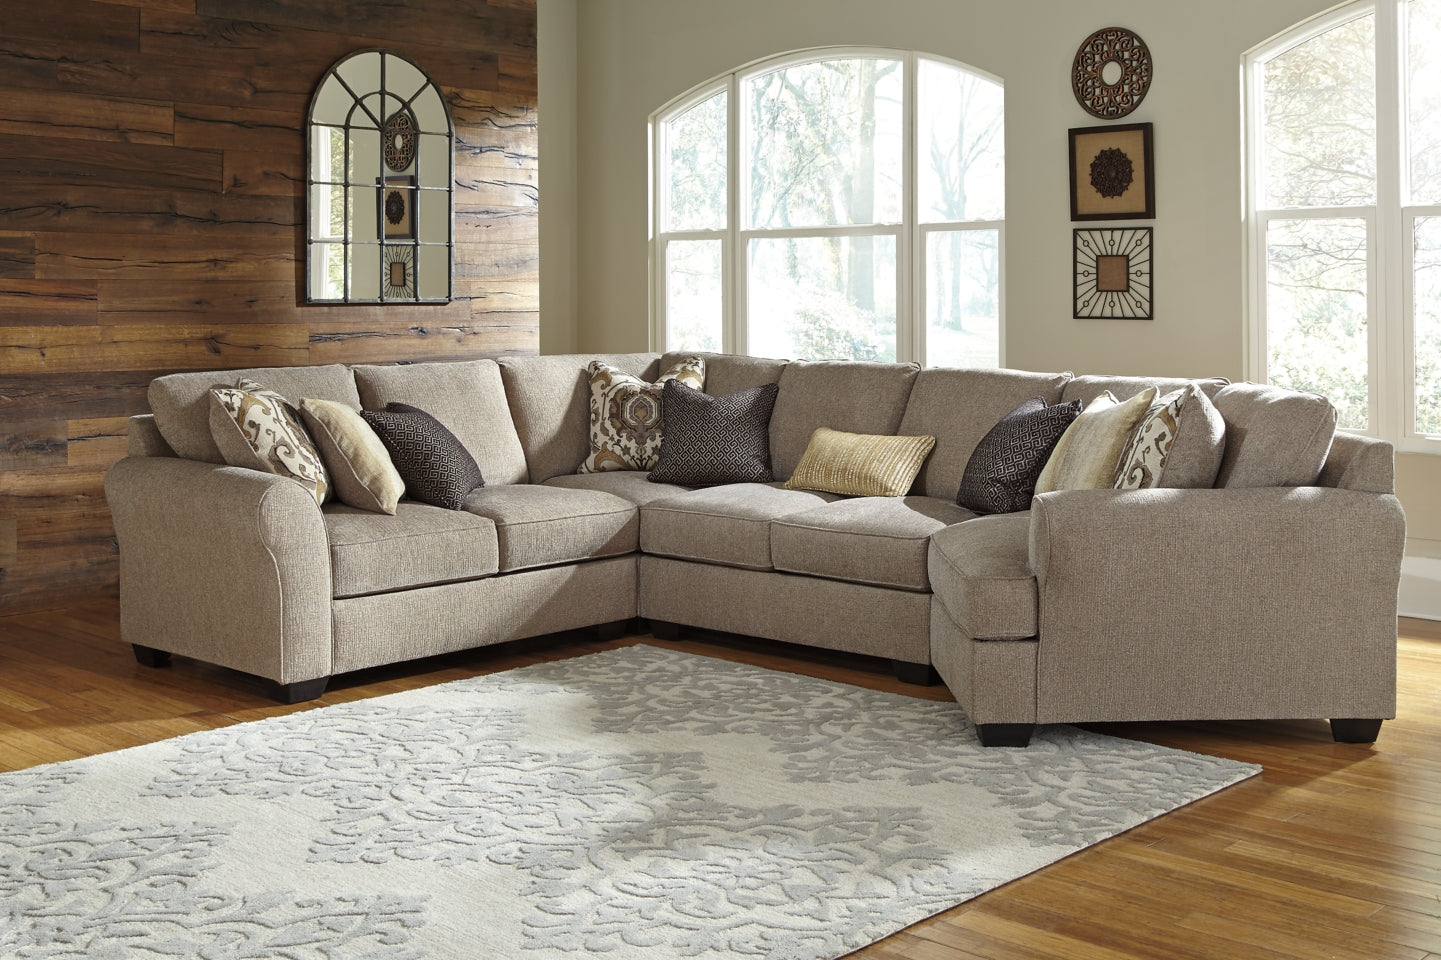 Pantomine 4-Piece Sectional with Ottoman - PKG010950 - furniture place usa